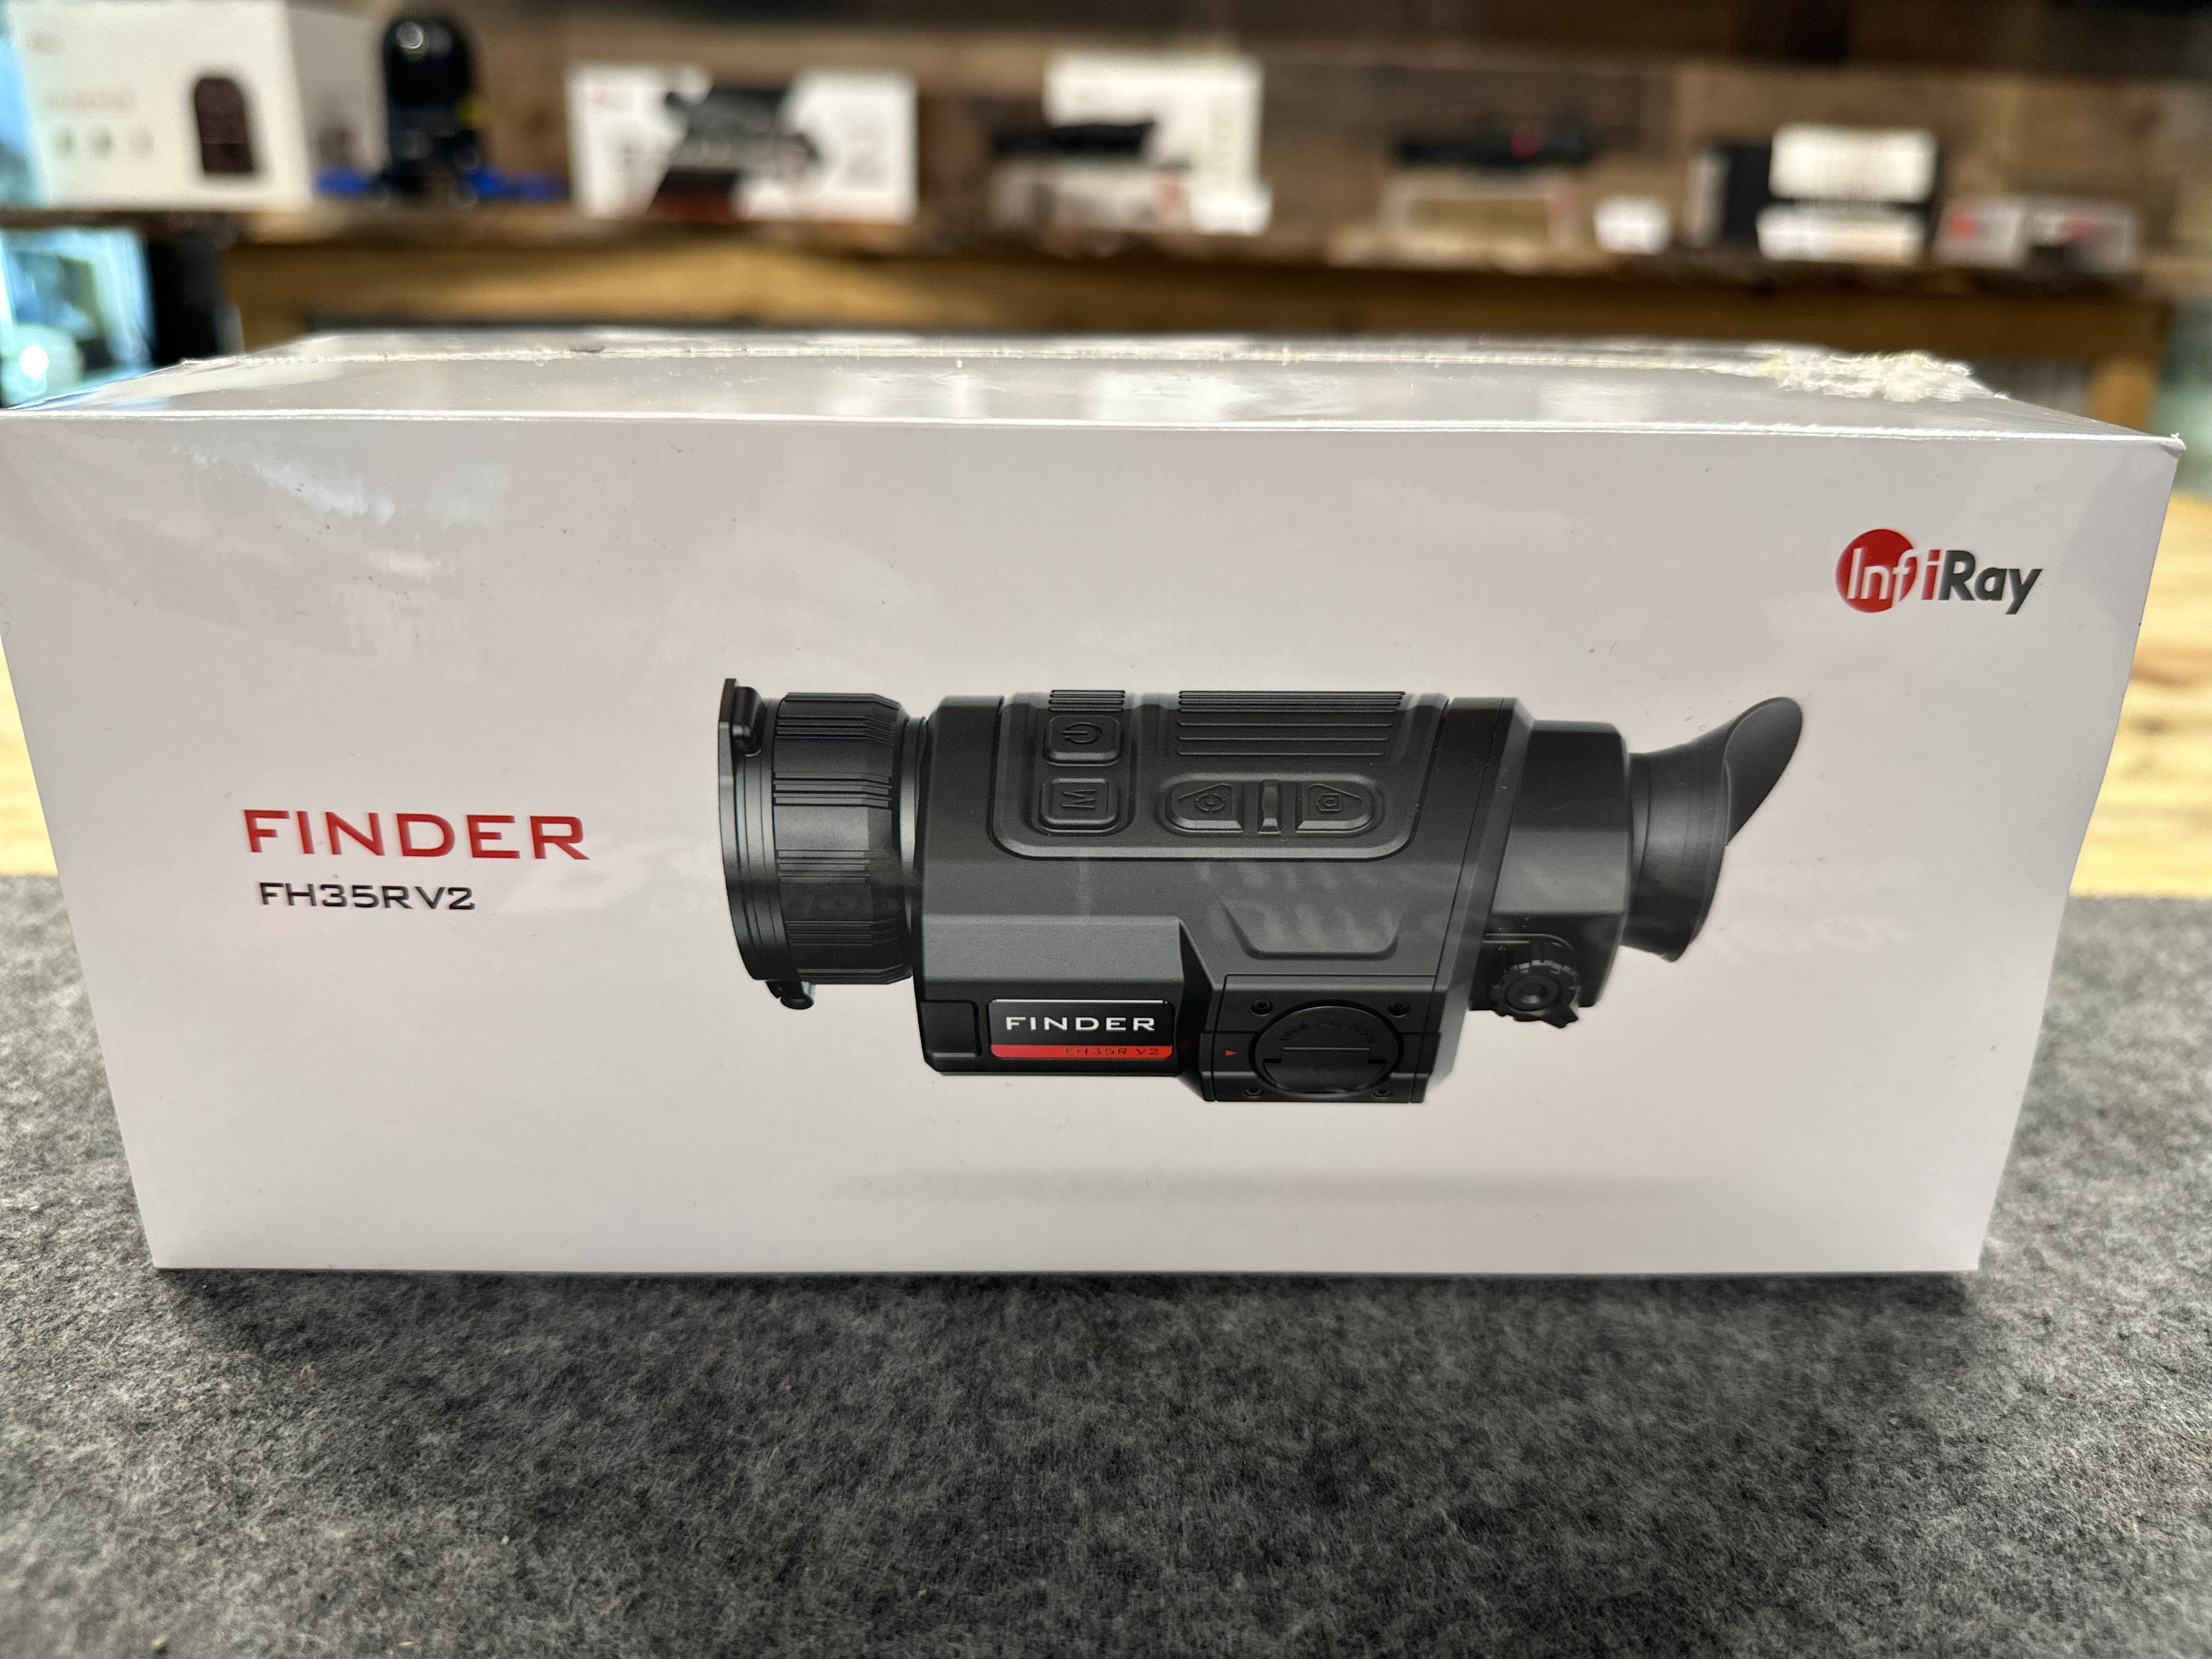 InfiRay Outdoor FINDER FH35R V2 640 - Warranty Replacement(New)